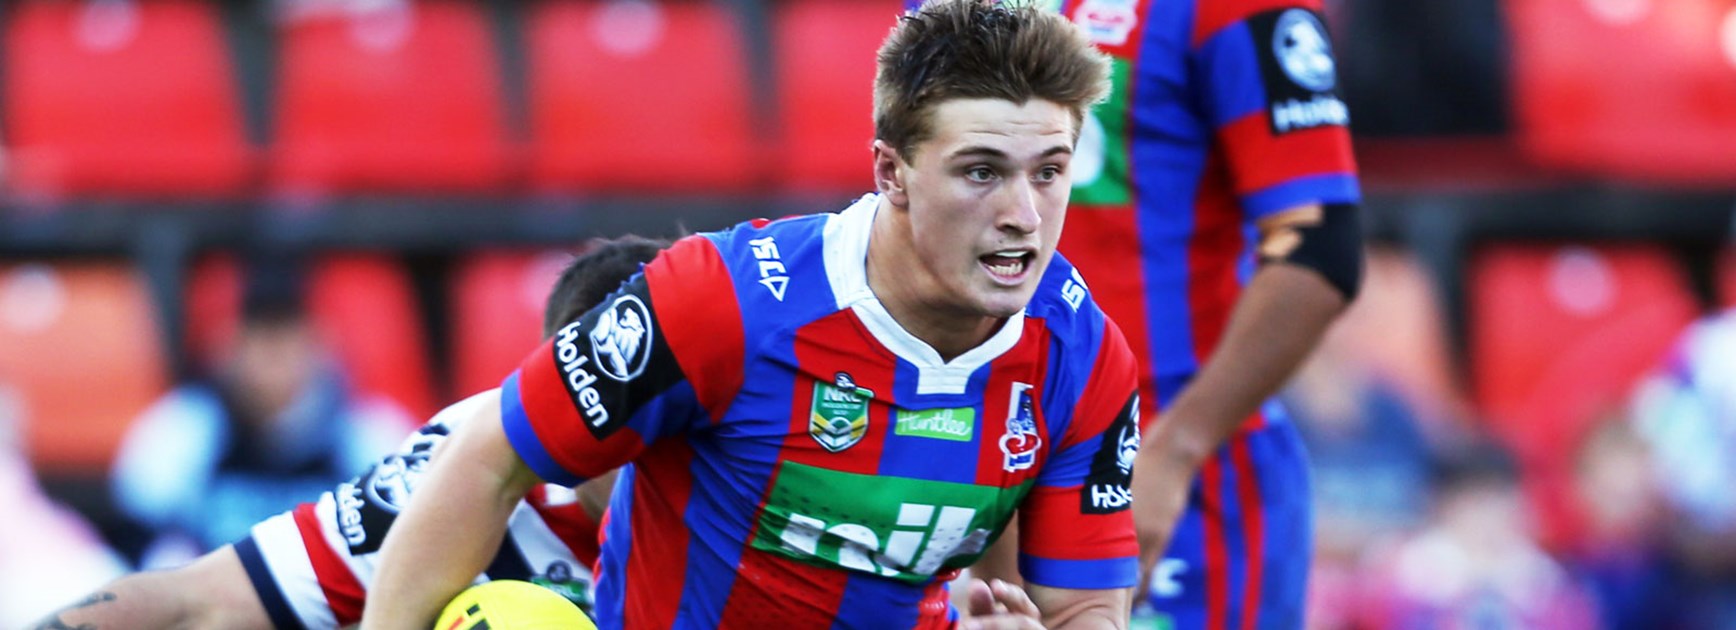 The Knights enjoyed a late victory over the Roosters in the Holden Cup.